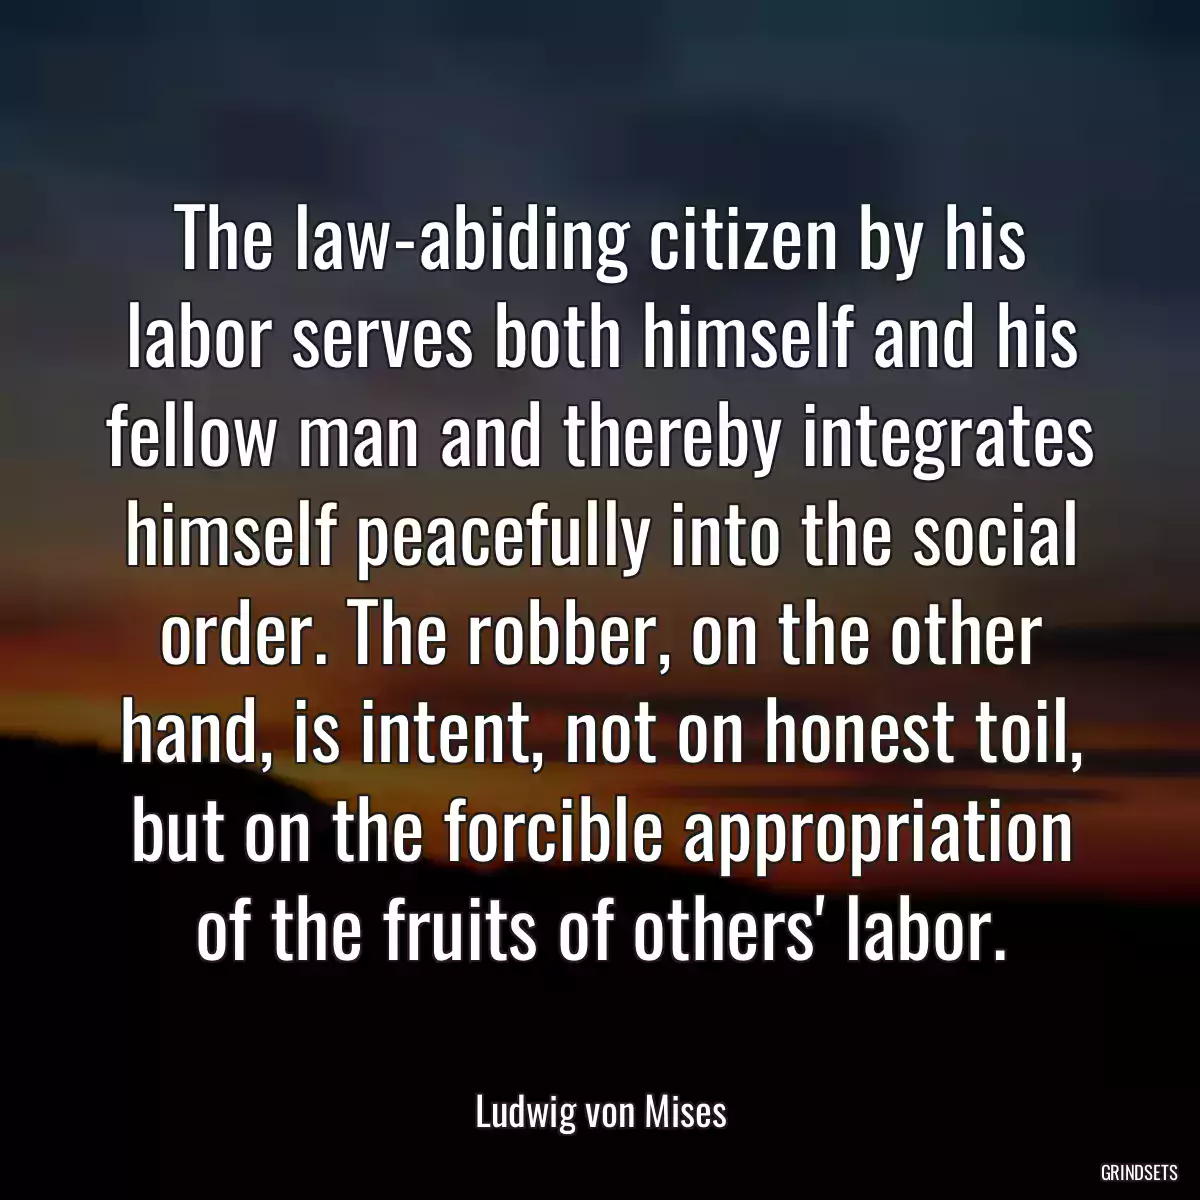 The law-abiding citizen by his labor serves both himself and his fellow man and thereby integrates himself peacefully into the social order. The robber, on the other hand, is intent, not on honest toil, but on the forcible appropriation of the fruits of others\' labor.